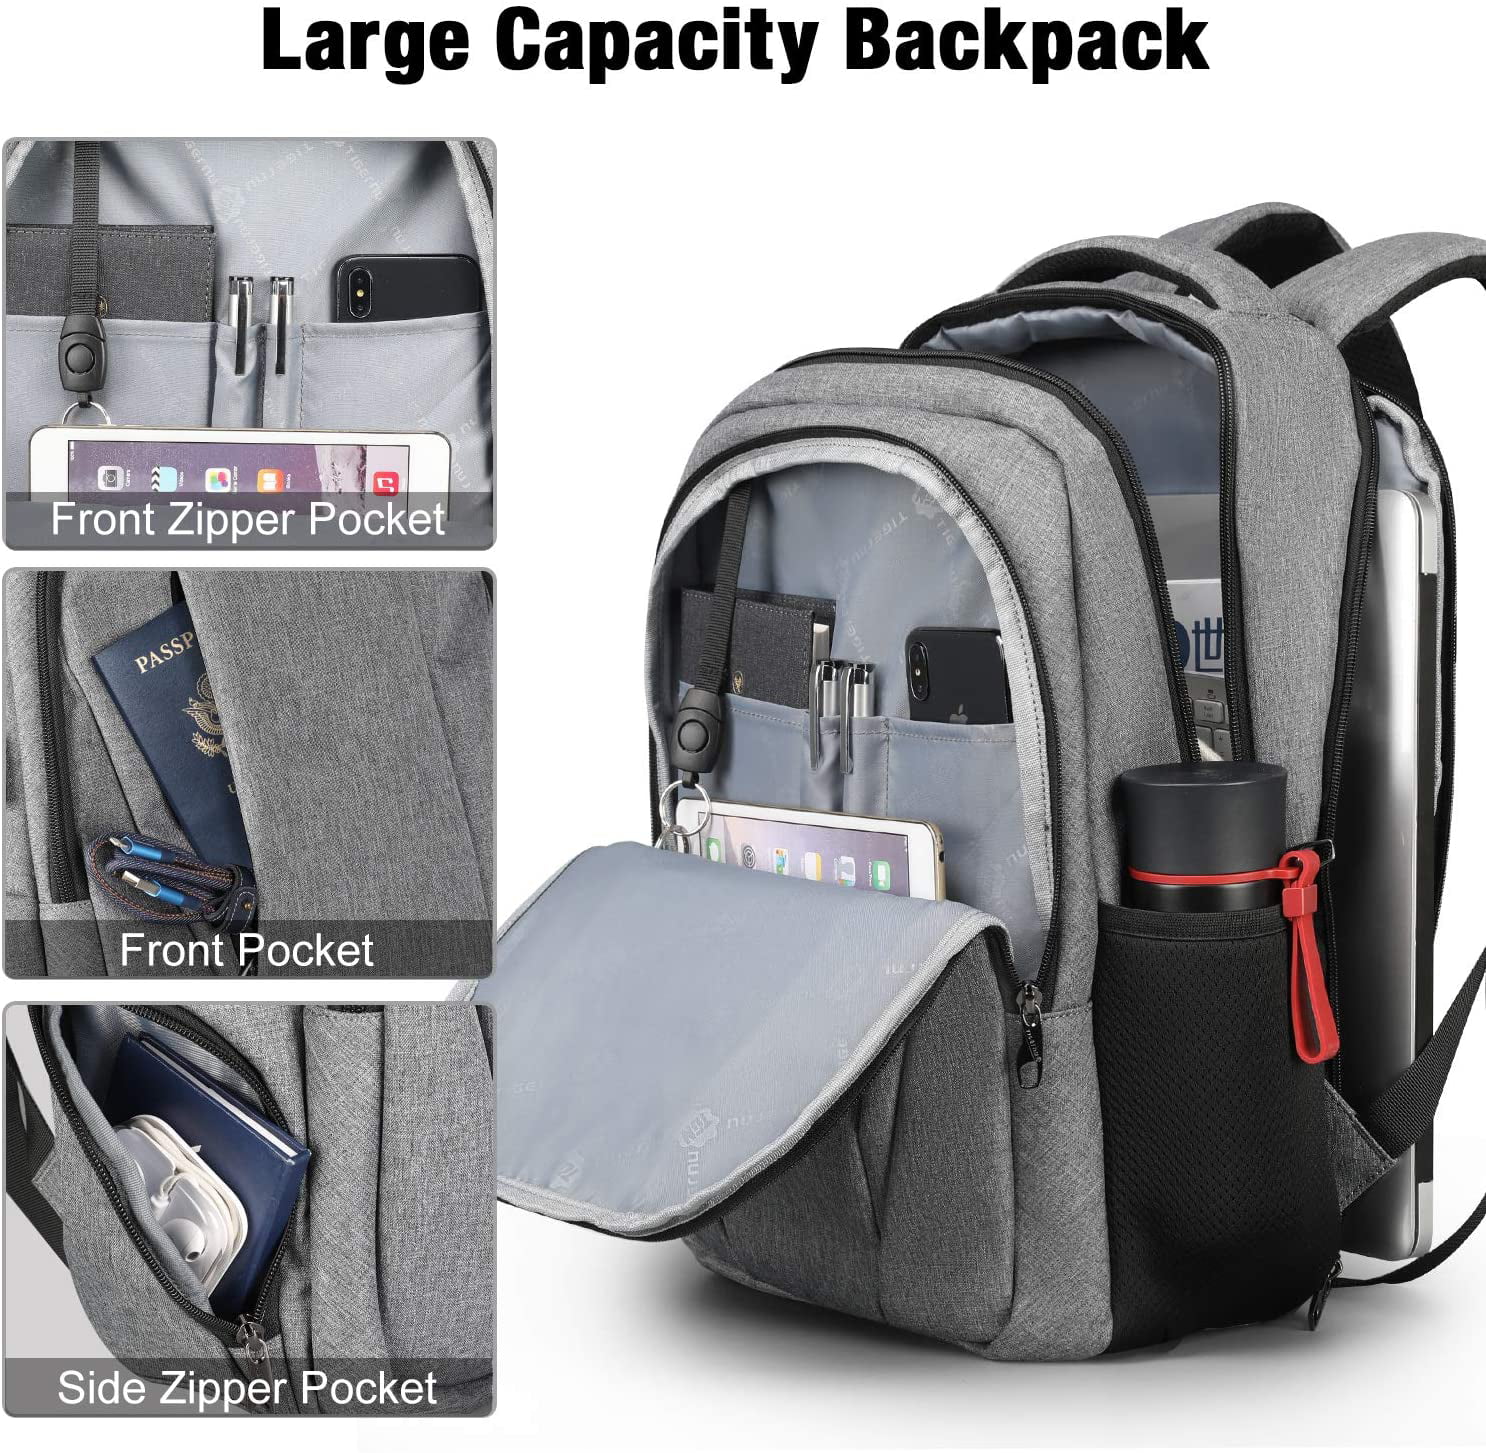 Casual Backpack for Boys Girls in School College Color Light and Shadow Large Daypack Laptop Fits 15.6Inches Computer for Students Hiking Outdoor Travel Bags for Women